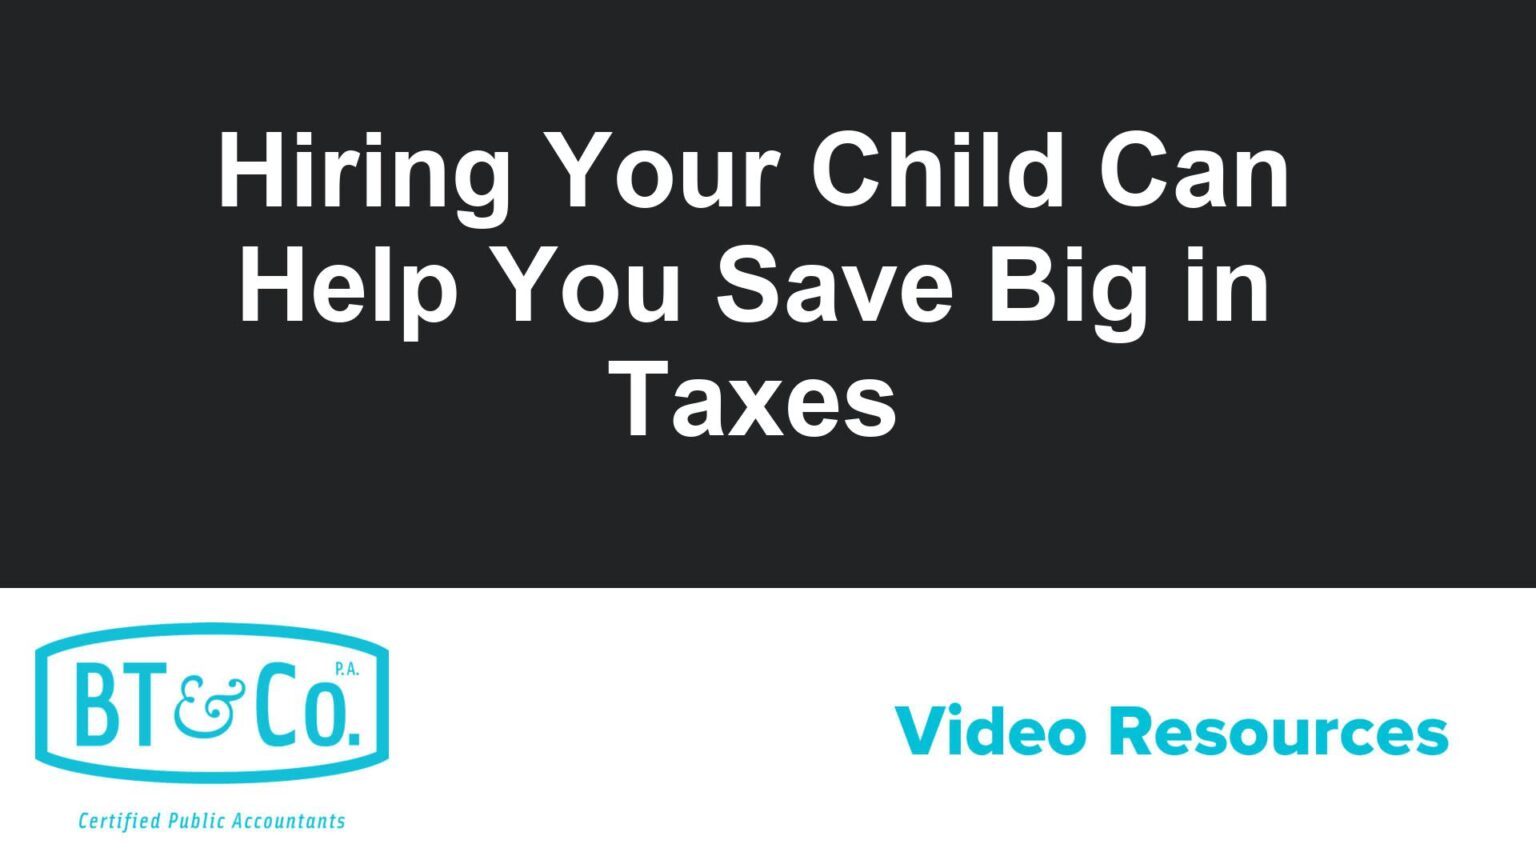 Hiring Your Child Can Help You Save Big in Taxes